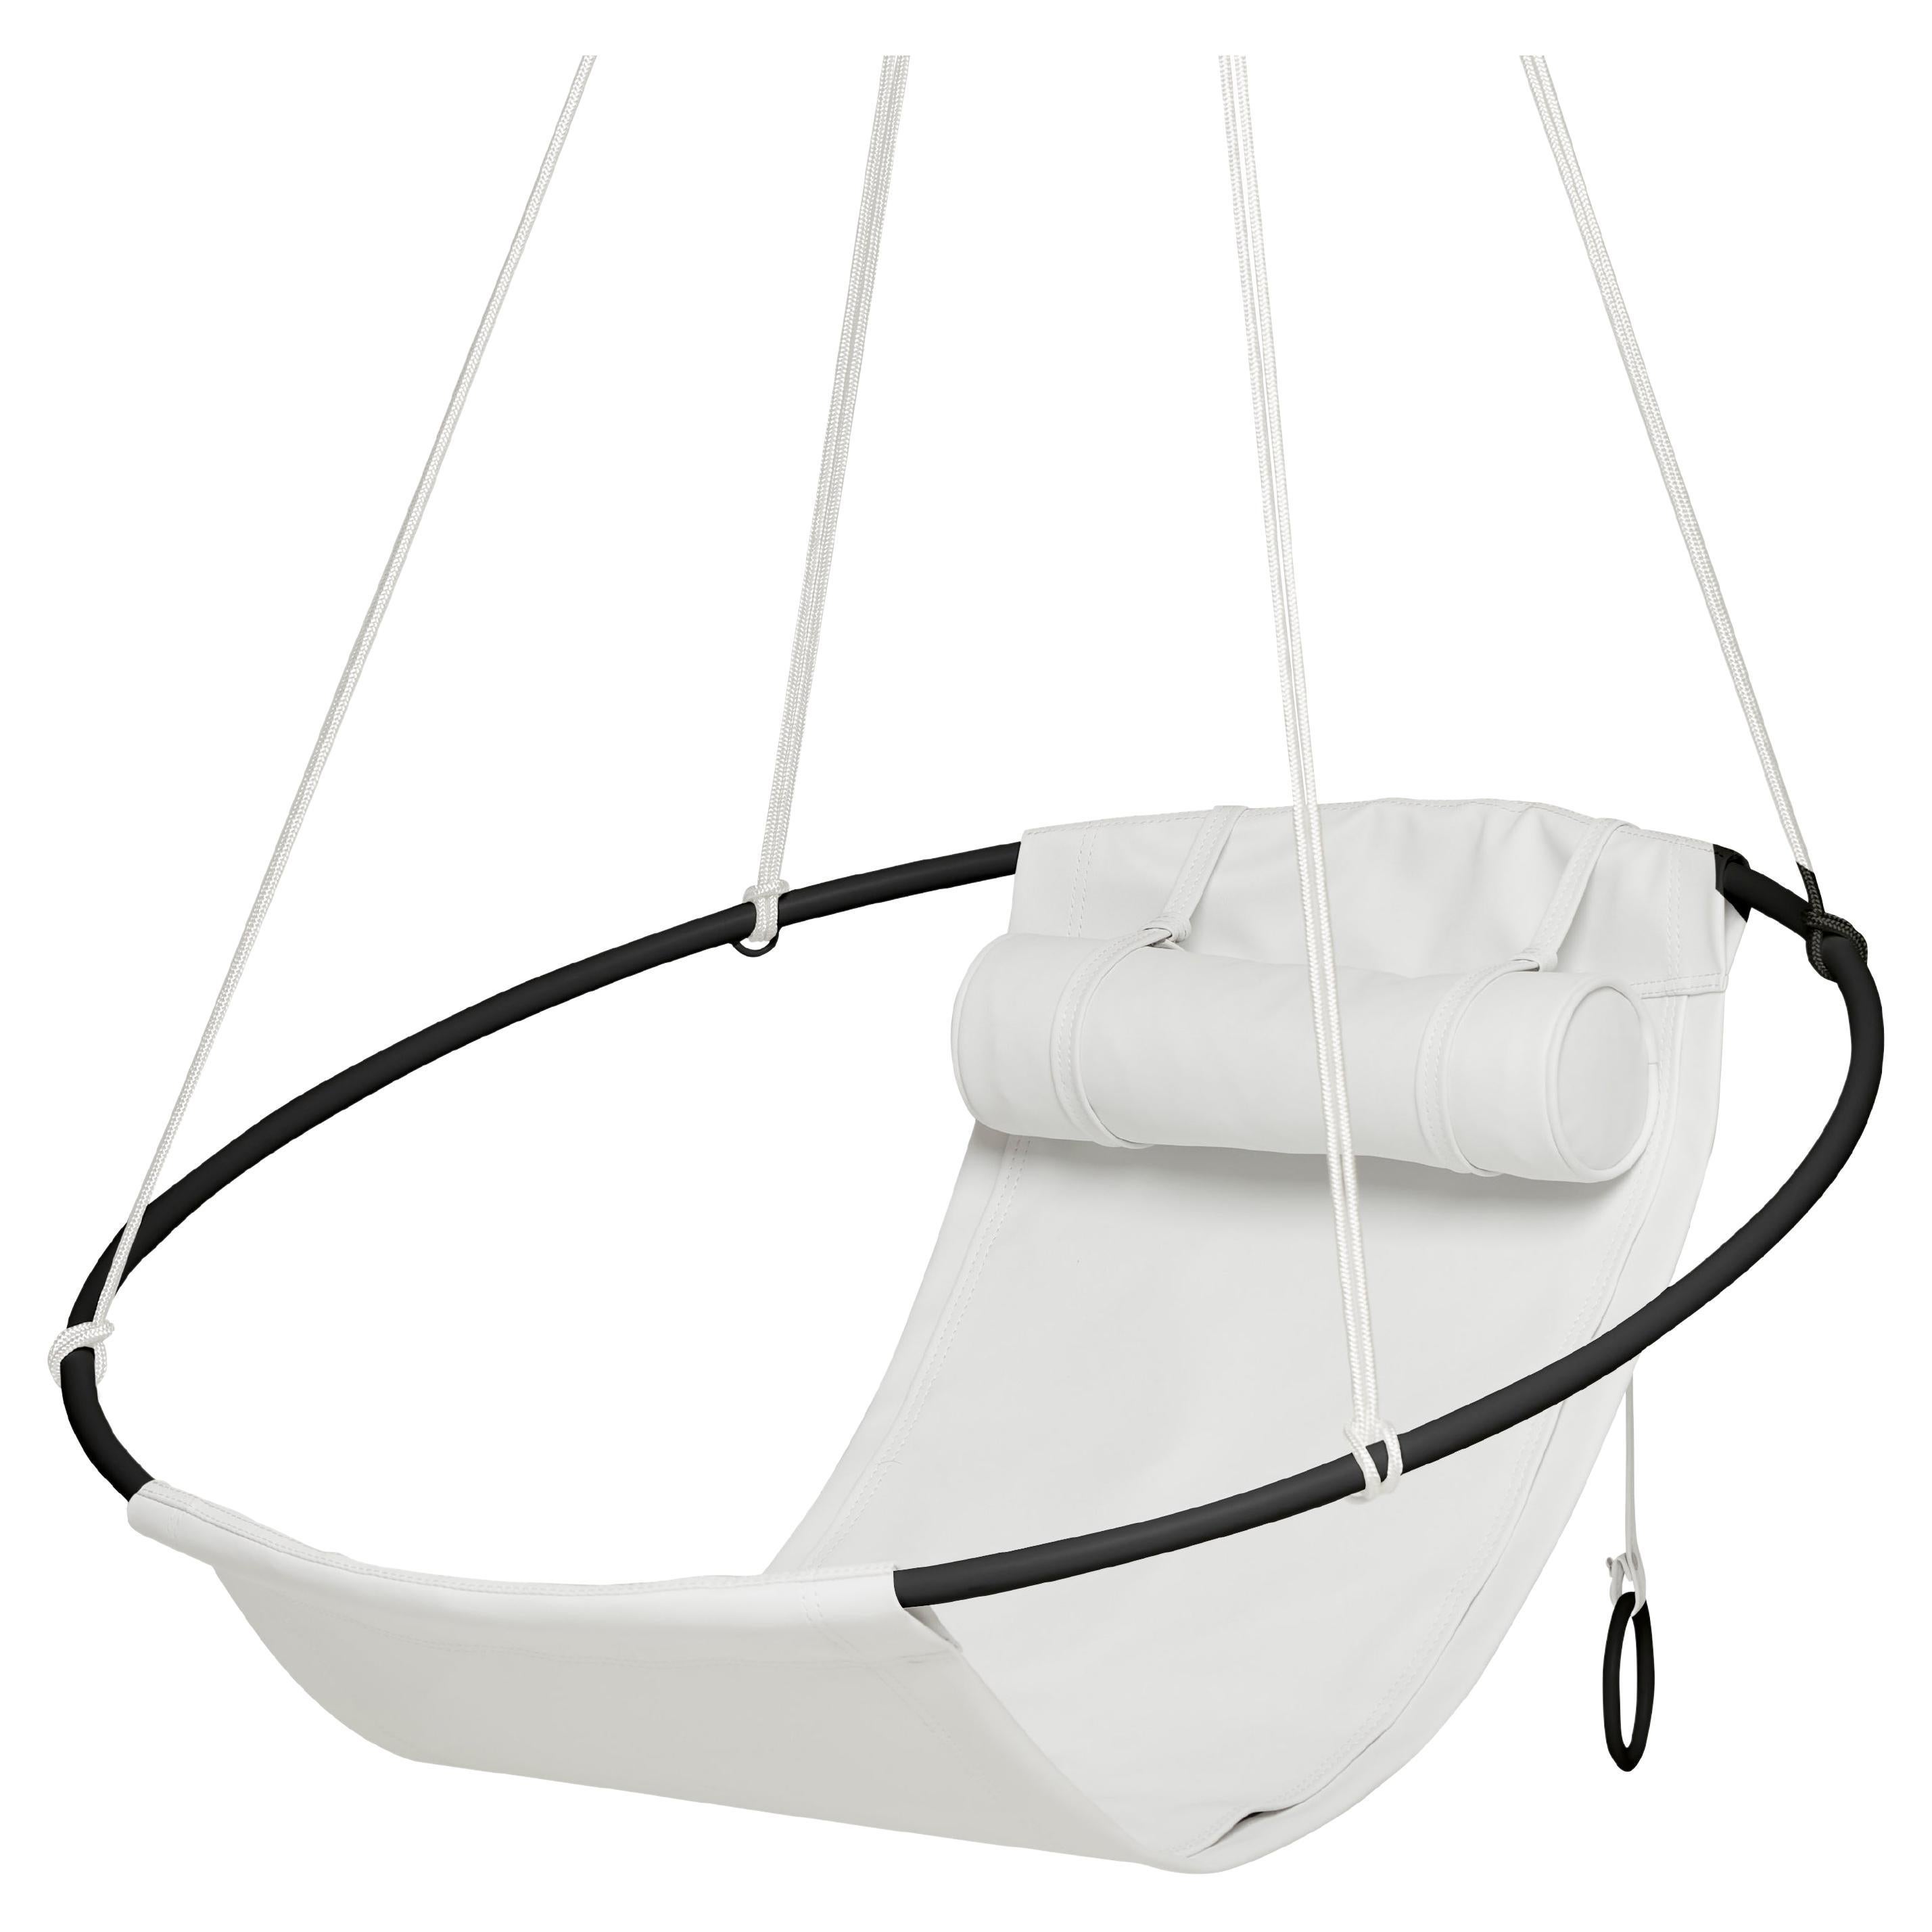 Modern Hanging Sling Chair for Outdoor! in Earth Tones, Customisable